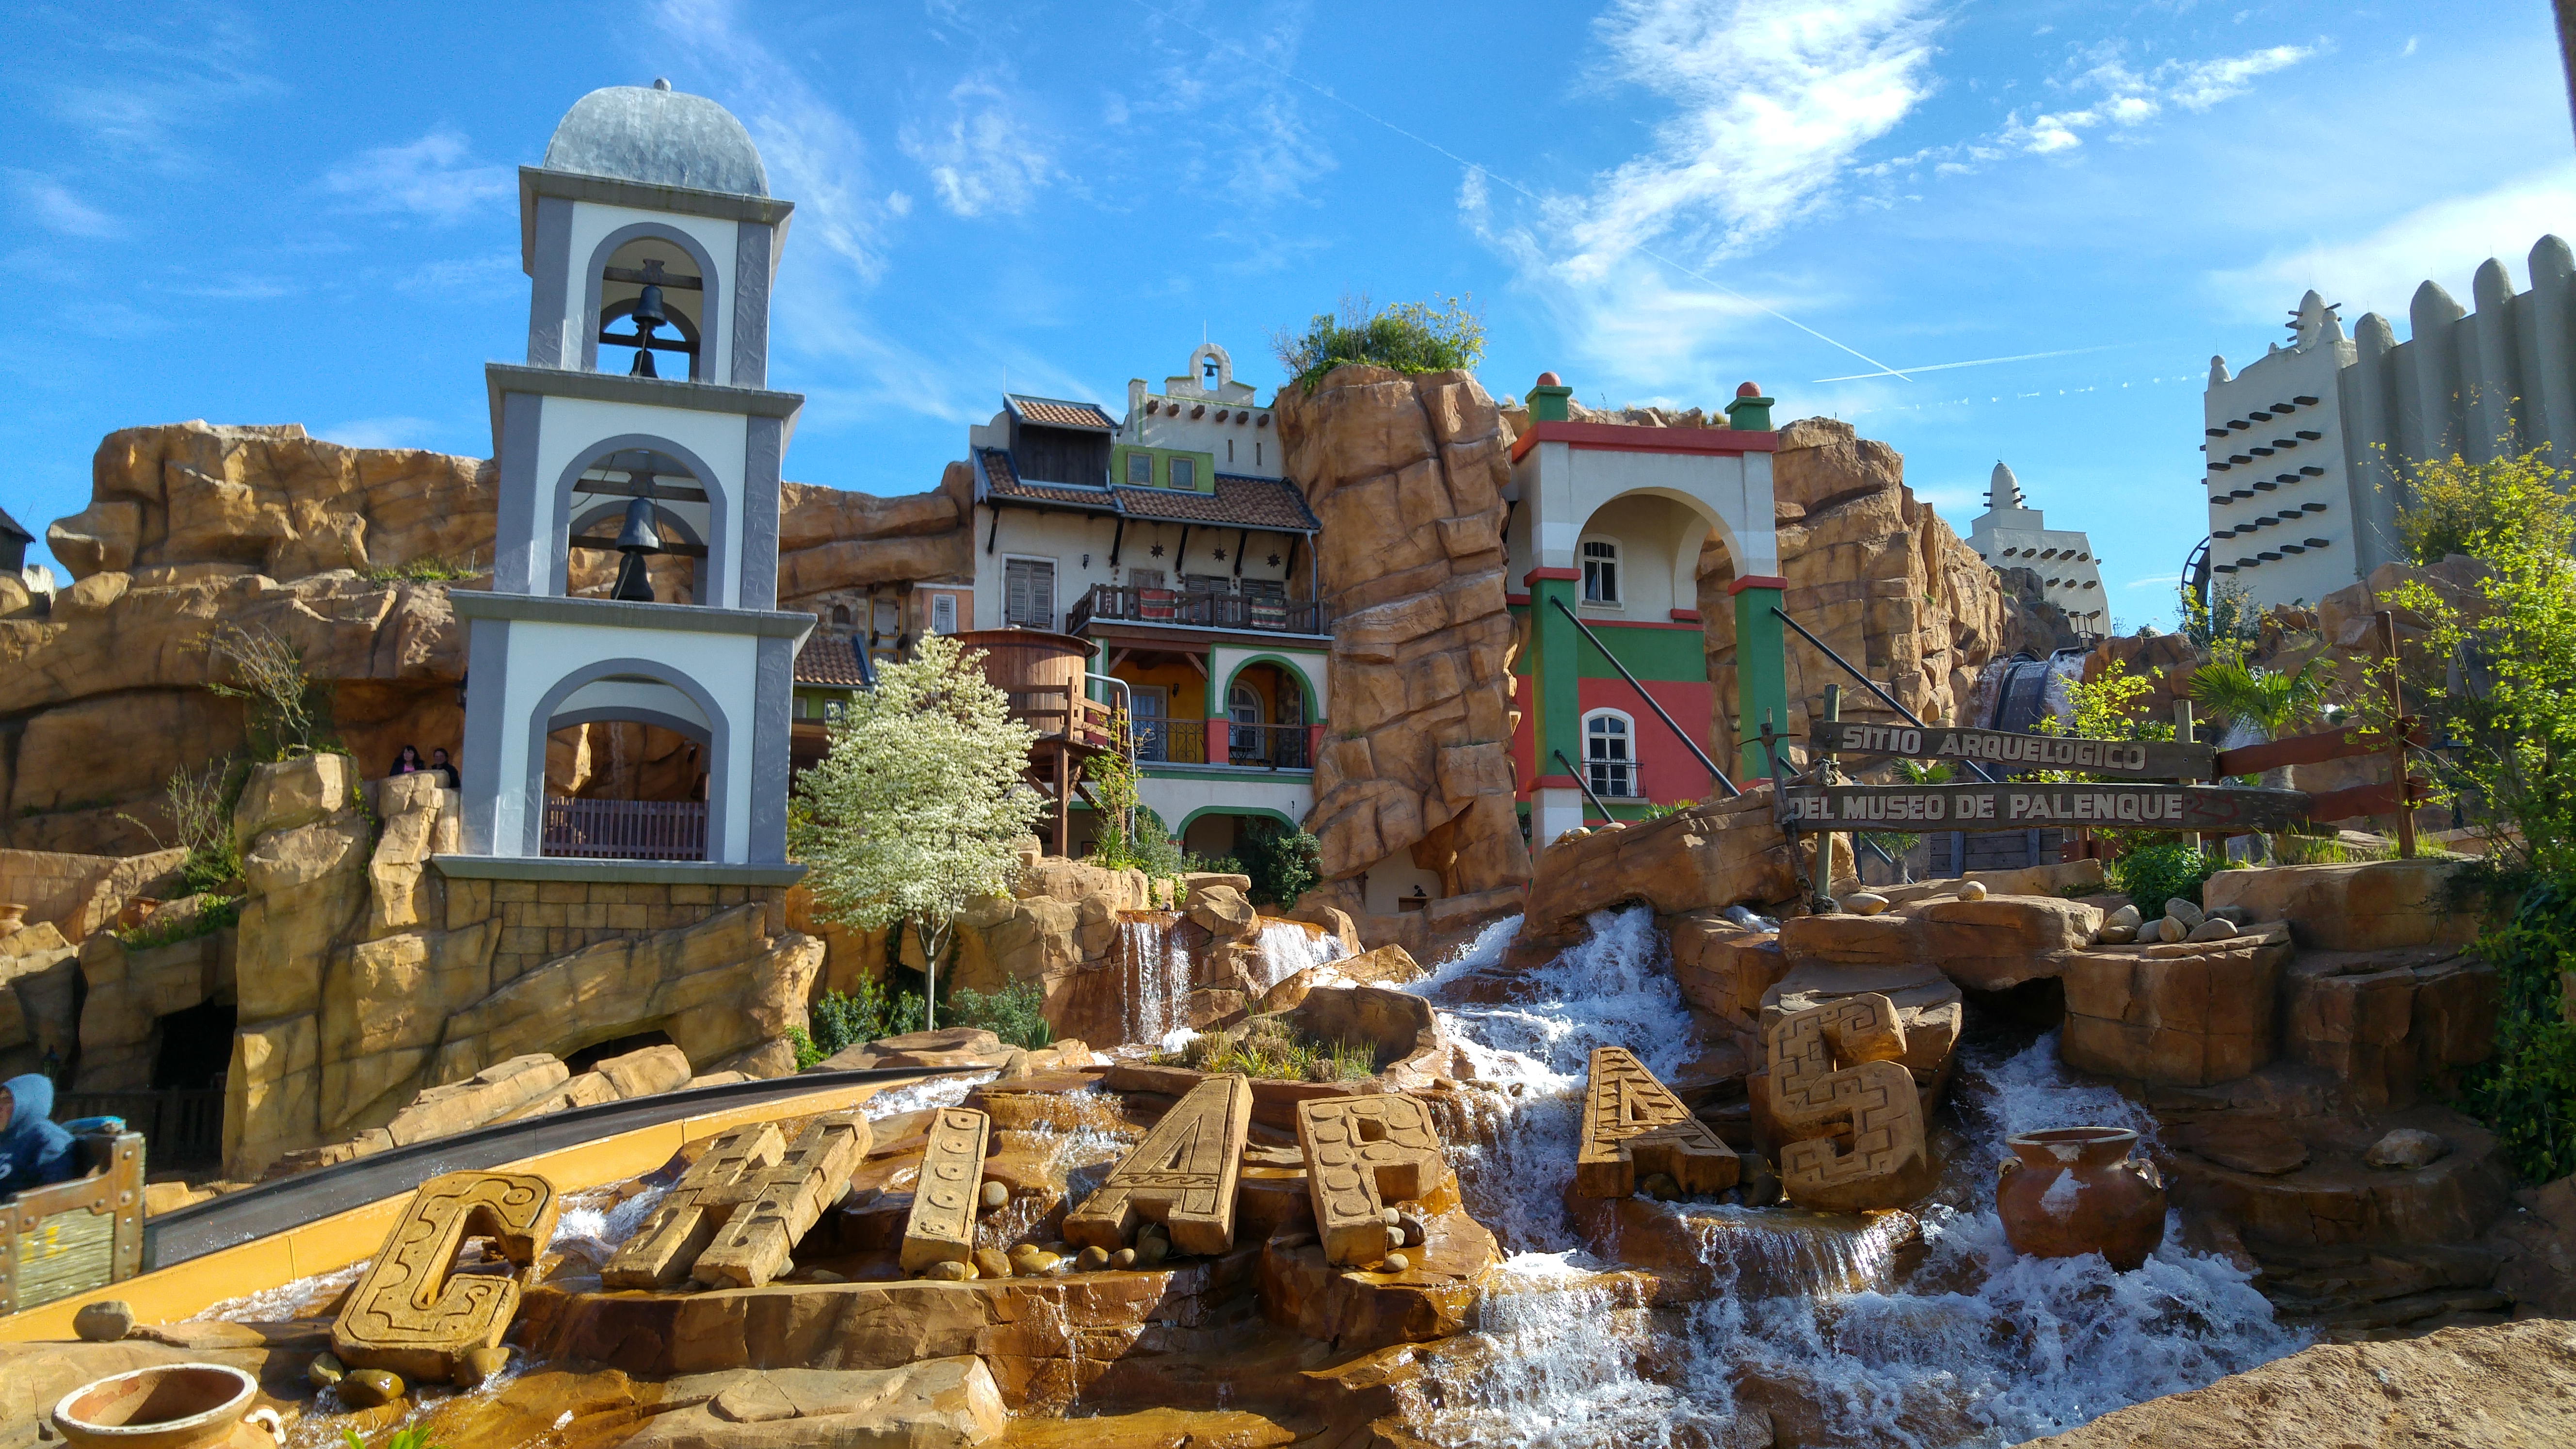 Phantasialand Chiapas by KevinSchepers (Wikipedia)